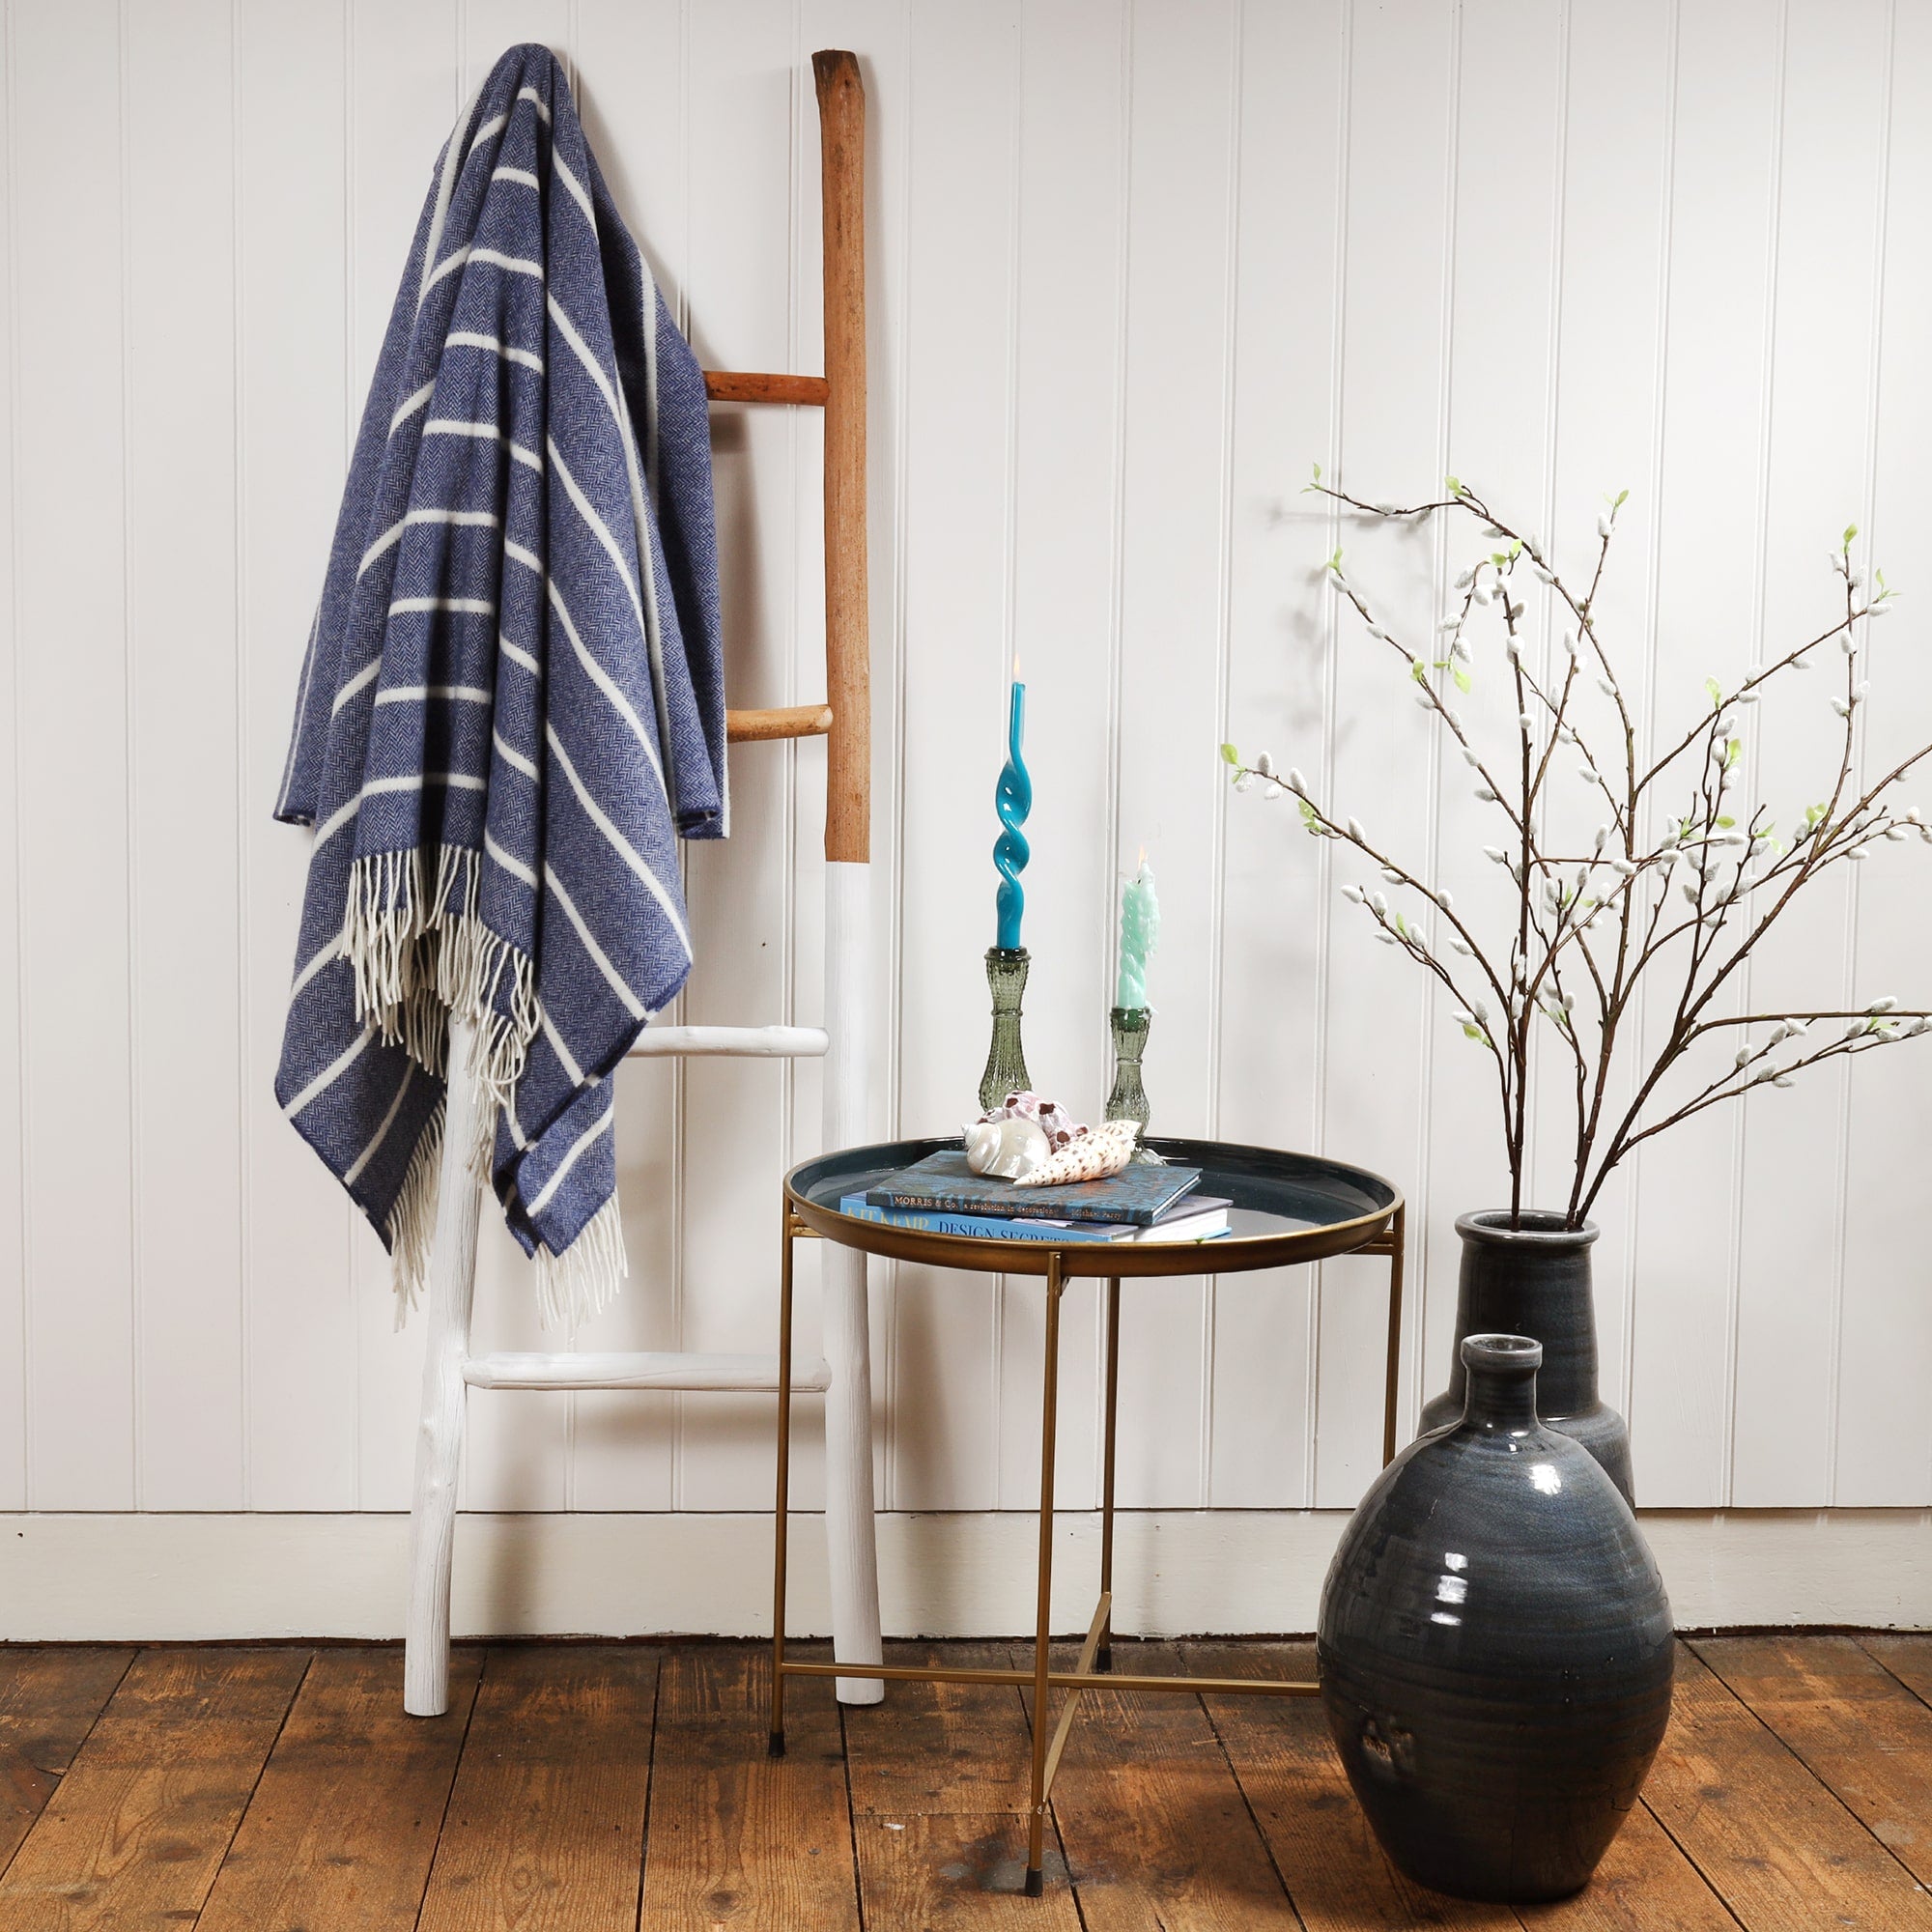 Lambswool Denim and White Stripe throw draped over a ladder against a wall.Next to the ladder is a table with books and a beachcomber Teapot and candles and candle holders.Next to the table are large navy vases with catkins coming out of them